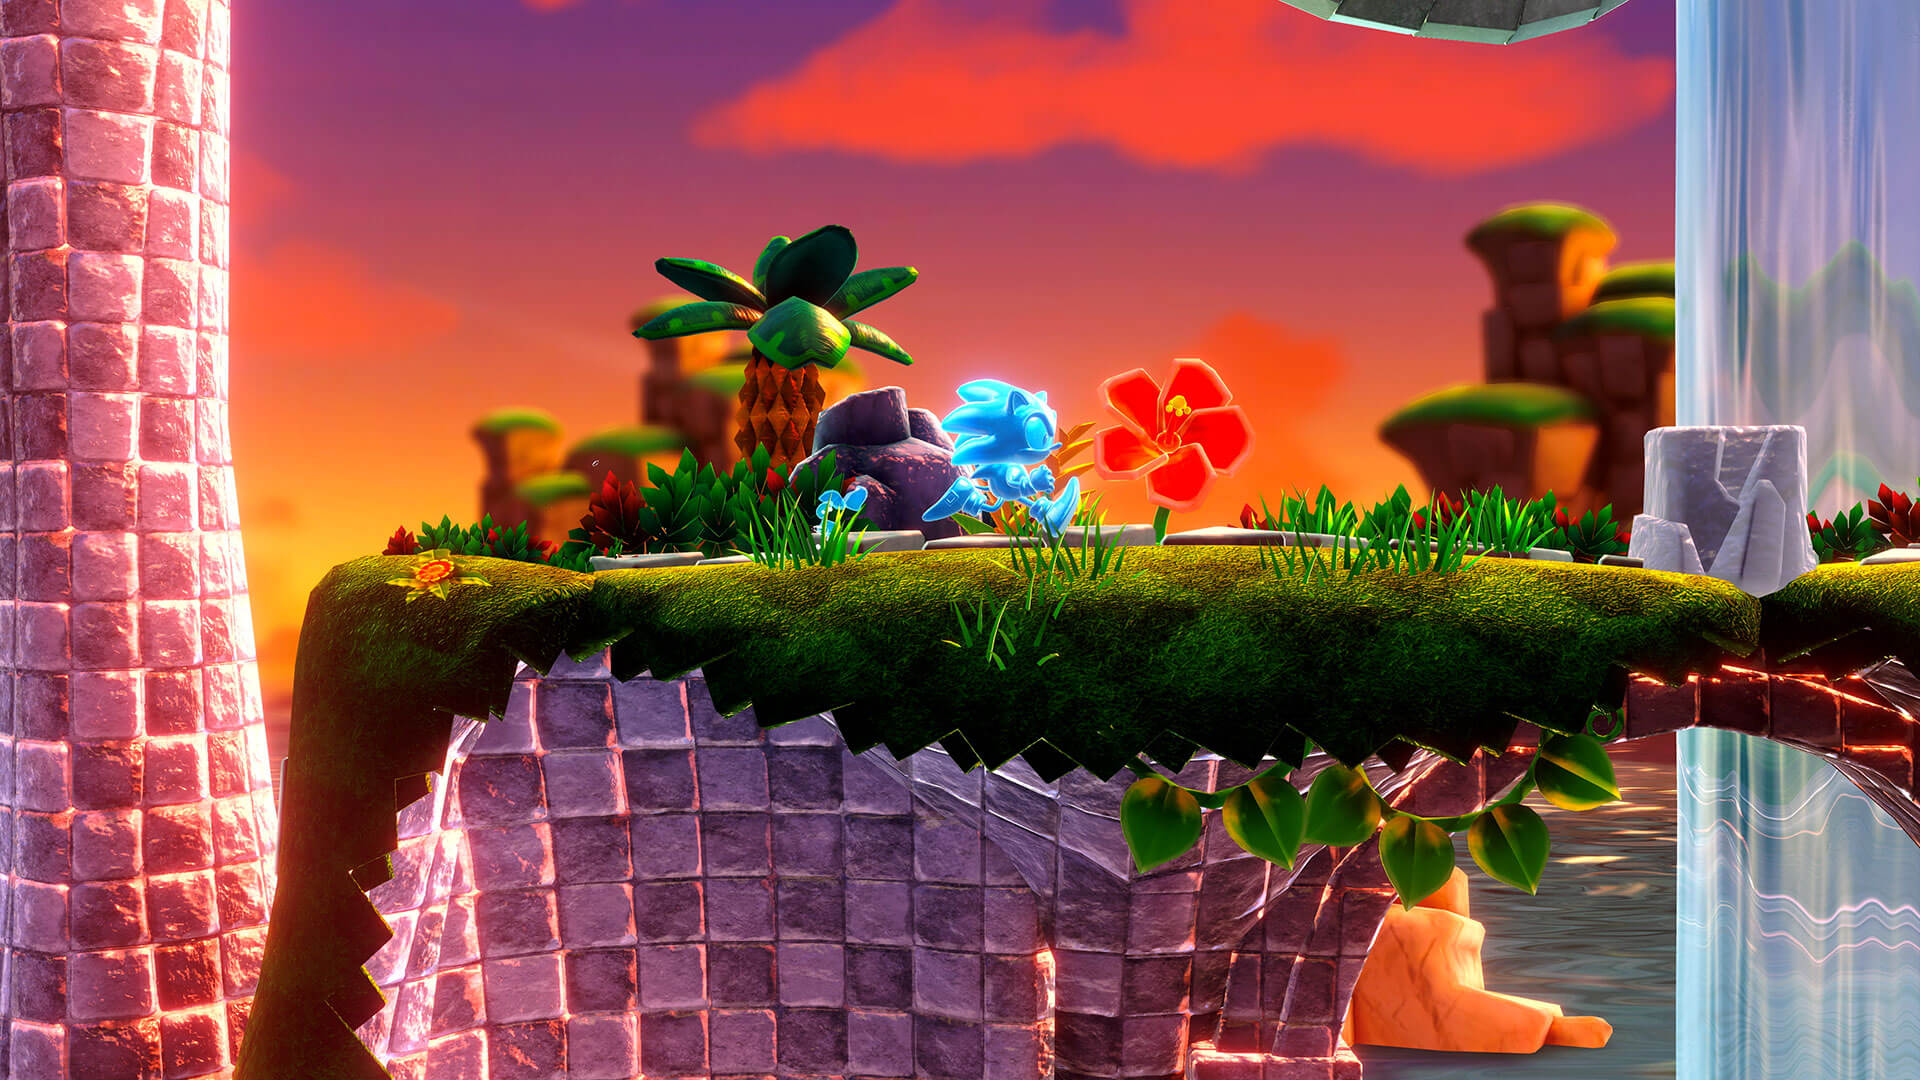 Sonic Superstars Announced For Consoles & PC; New 2D Sonic Game